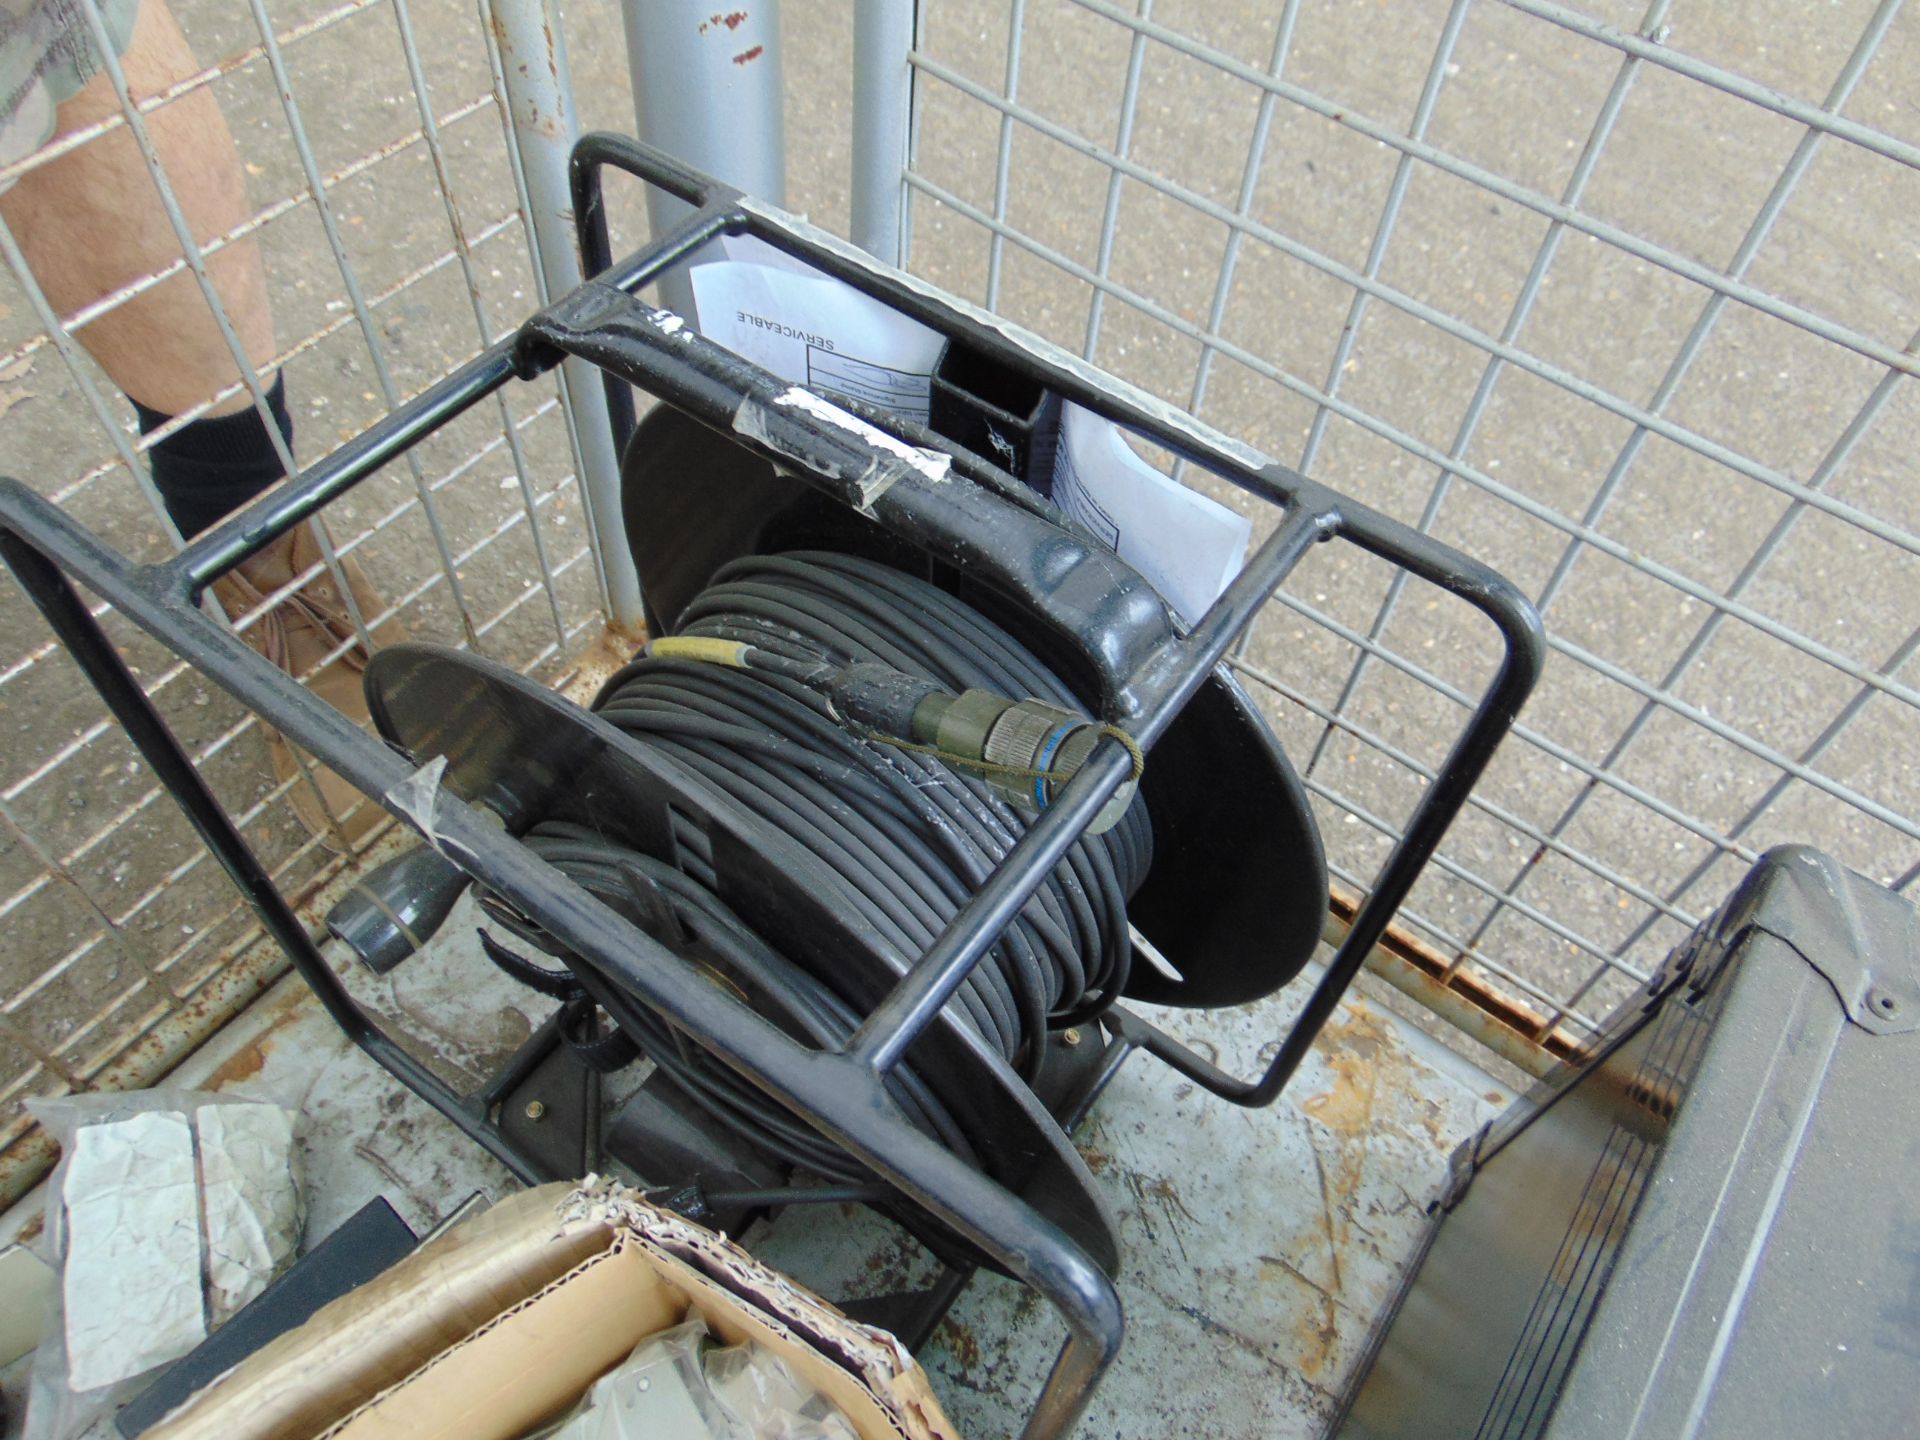 1x Stillage of Extension Leads, Cable Reel, Electrical eqpt etc - Image 4 of 6